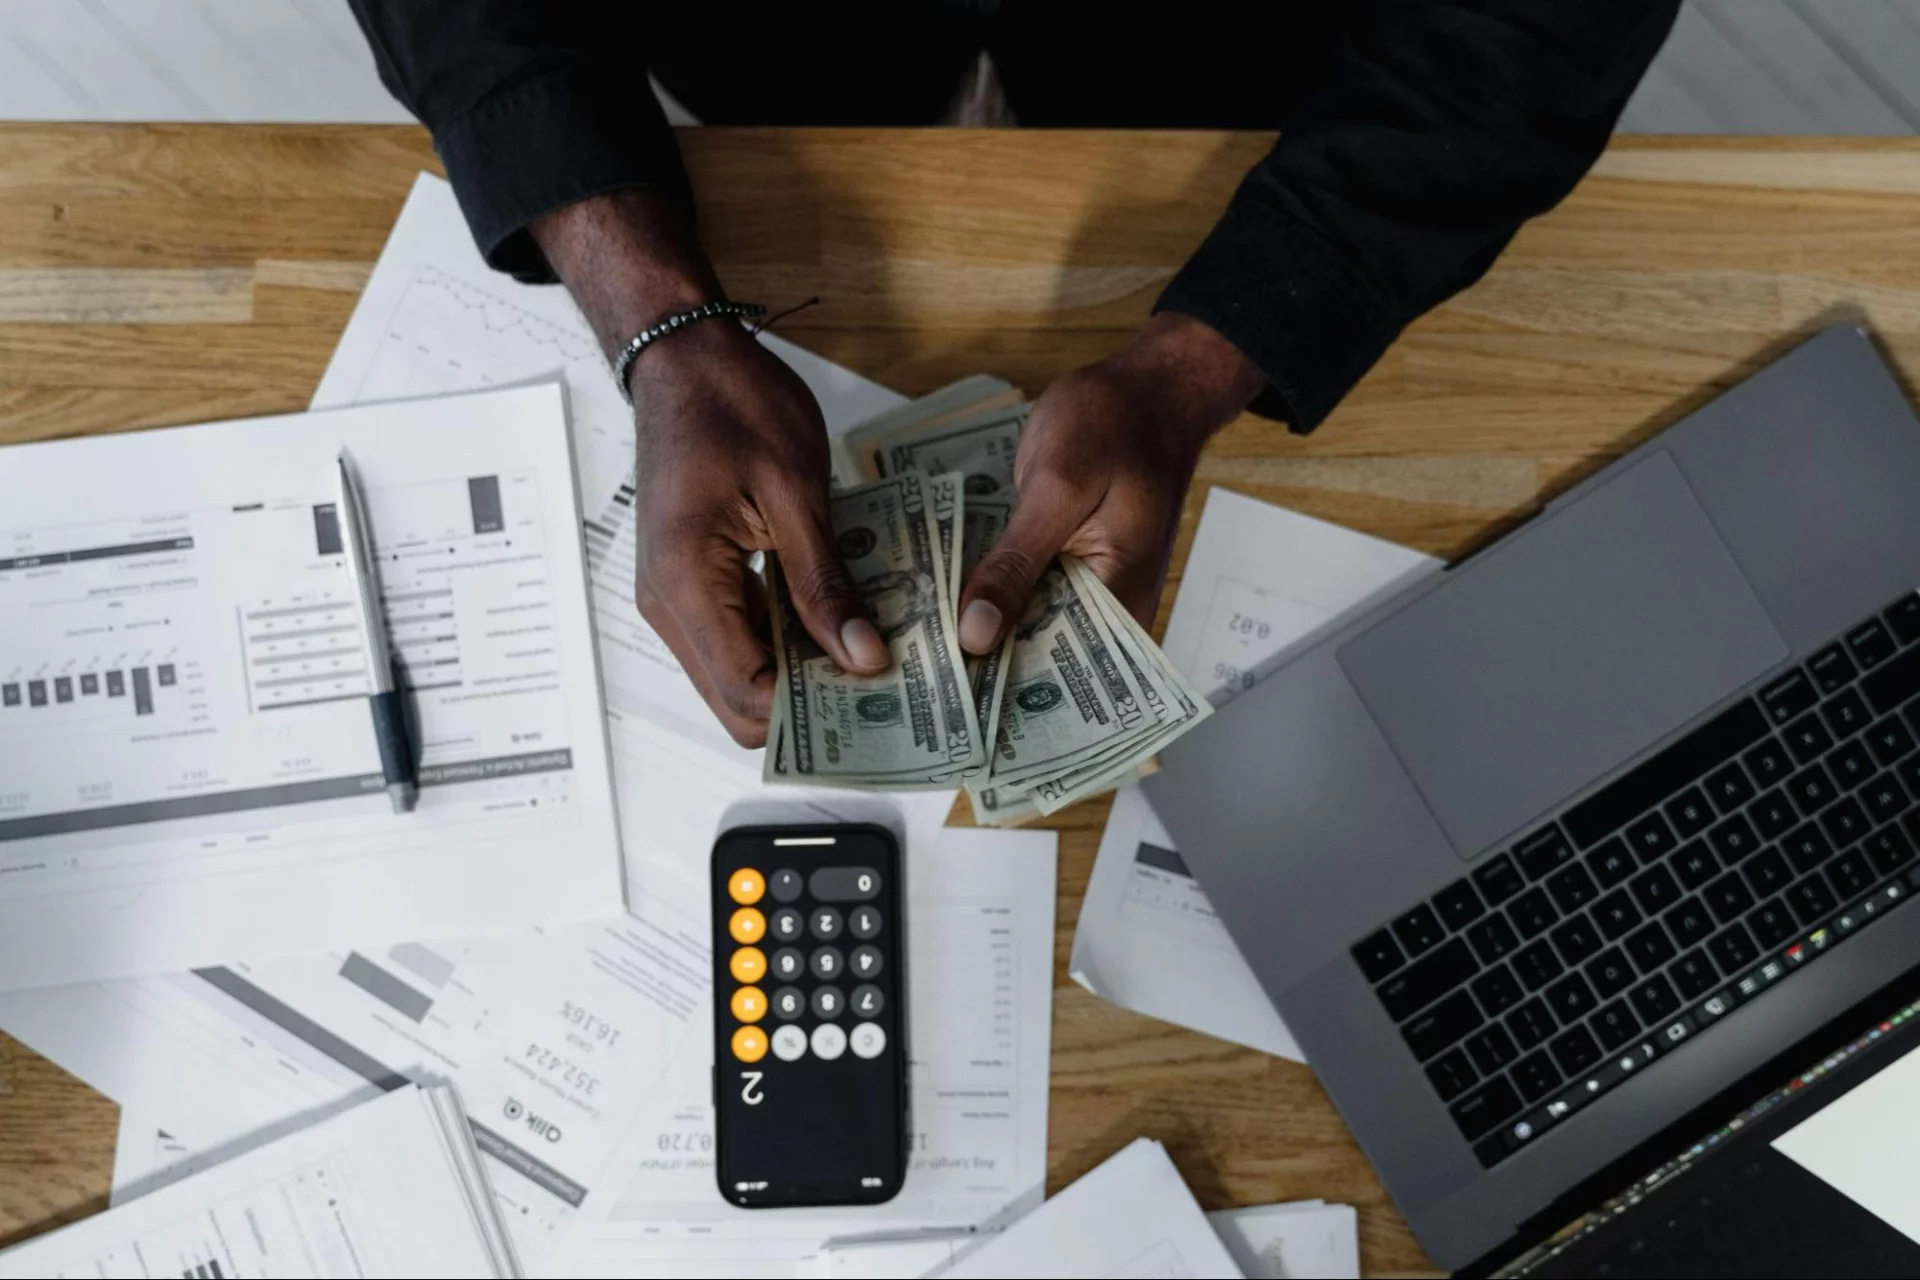 Image of a man counting cash at a desk with a calculator and spreadsheets